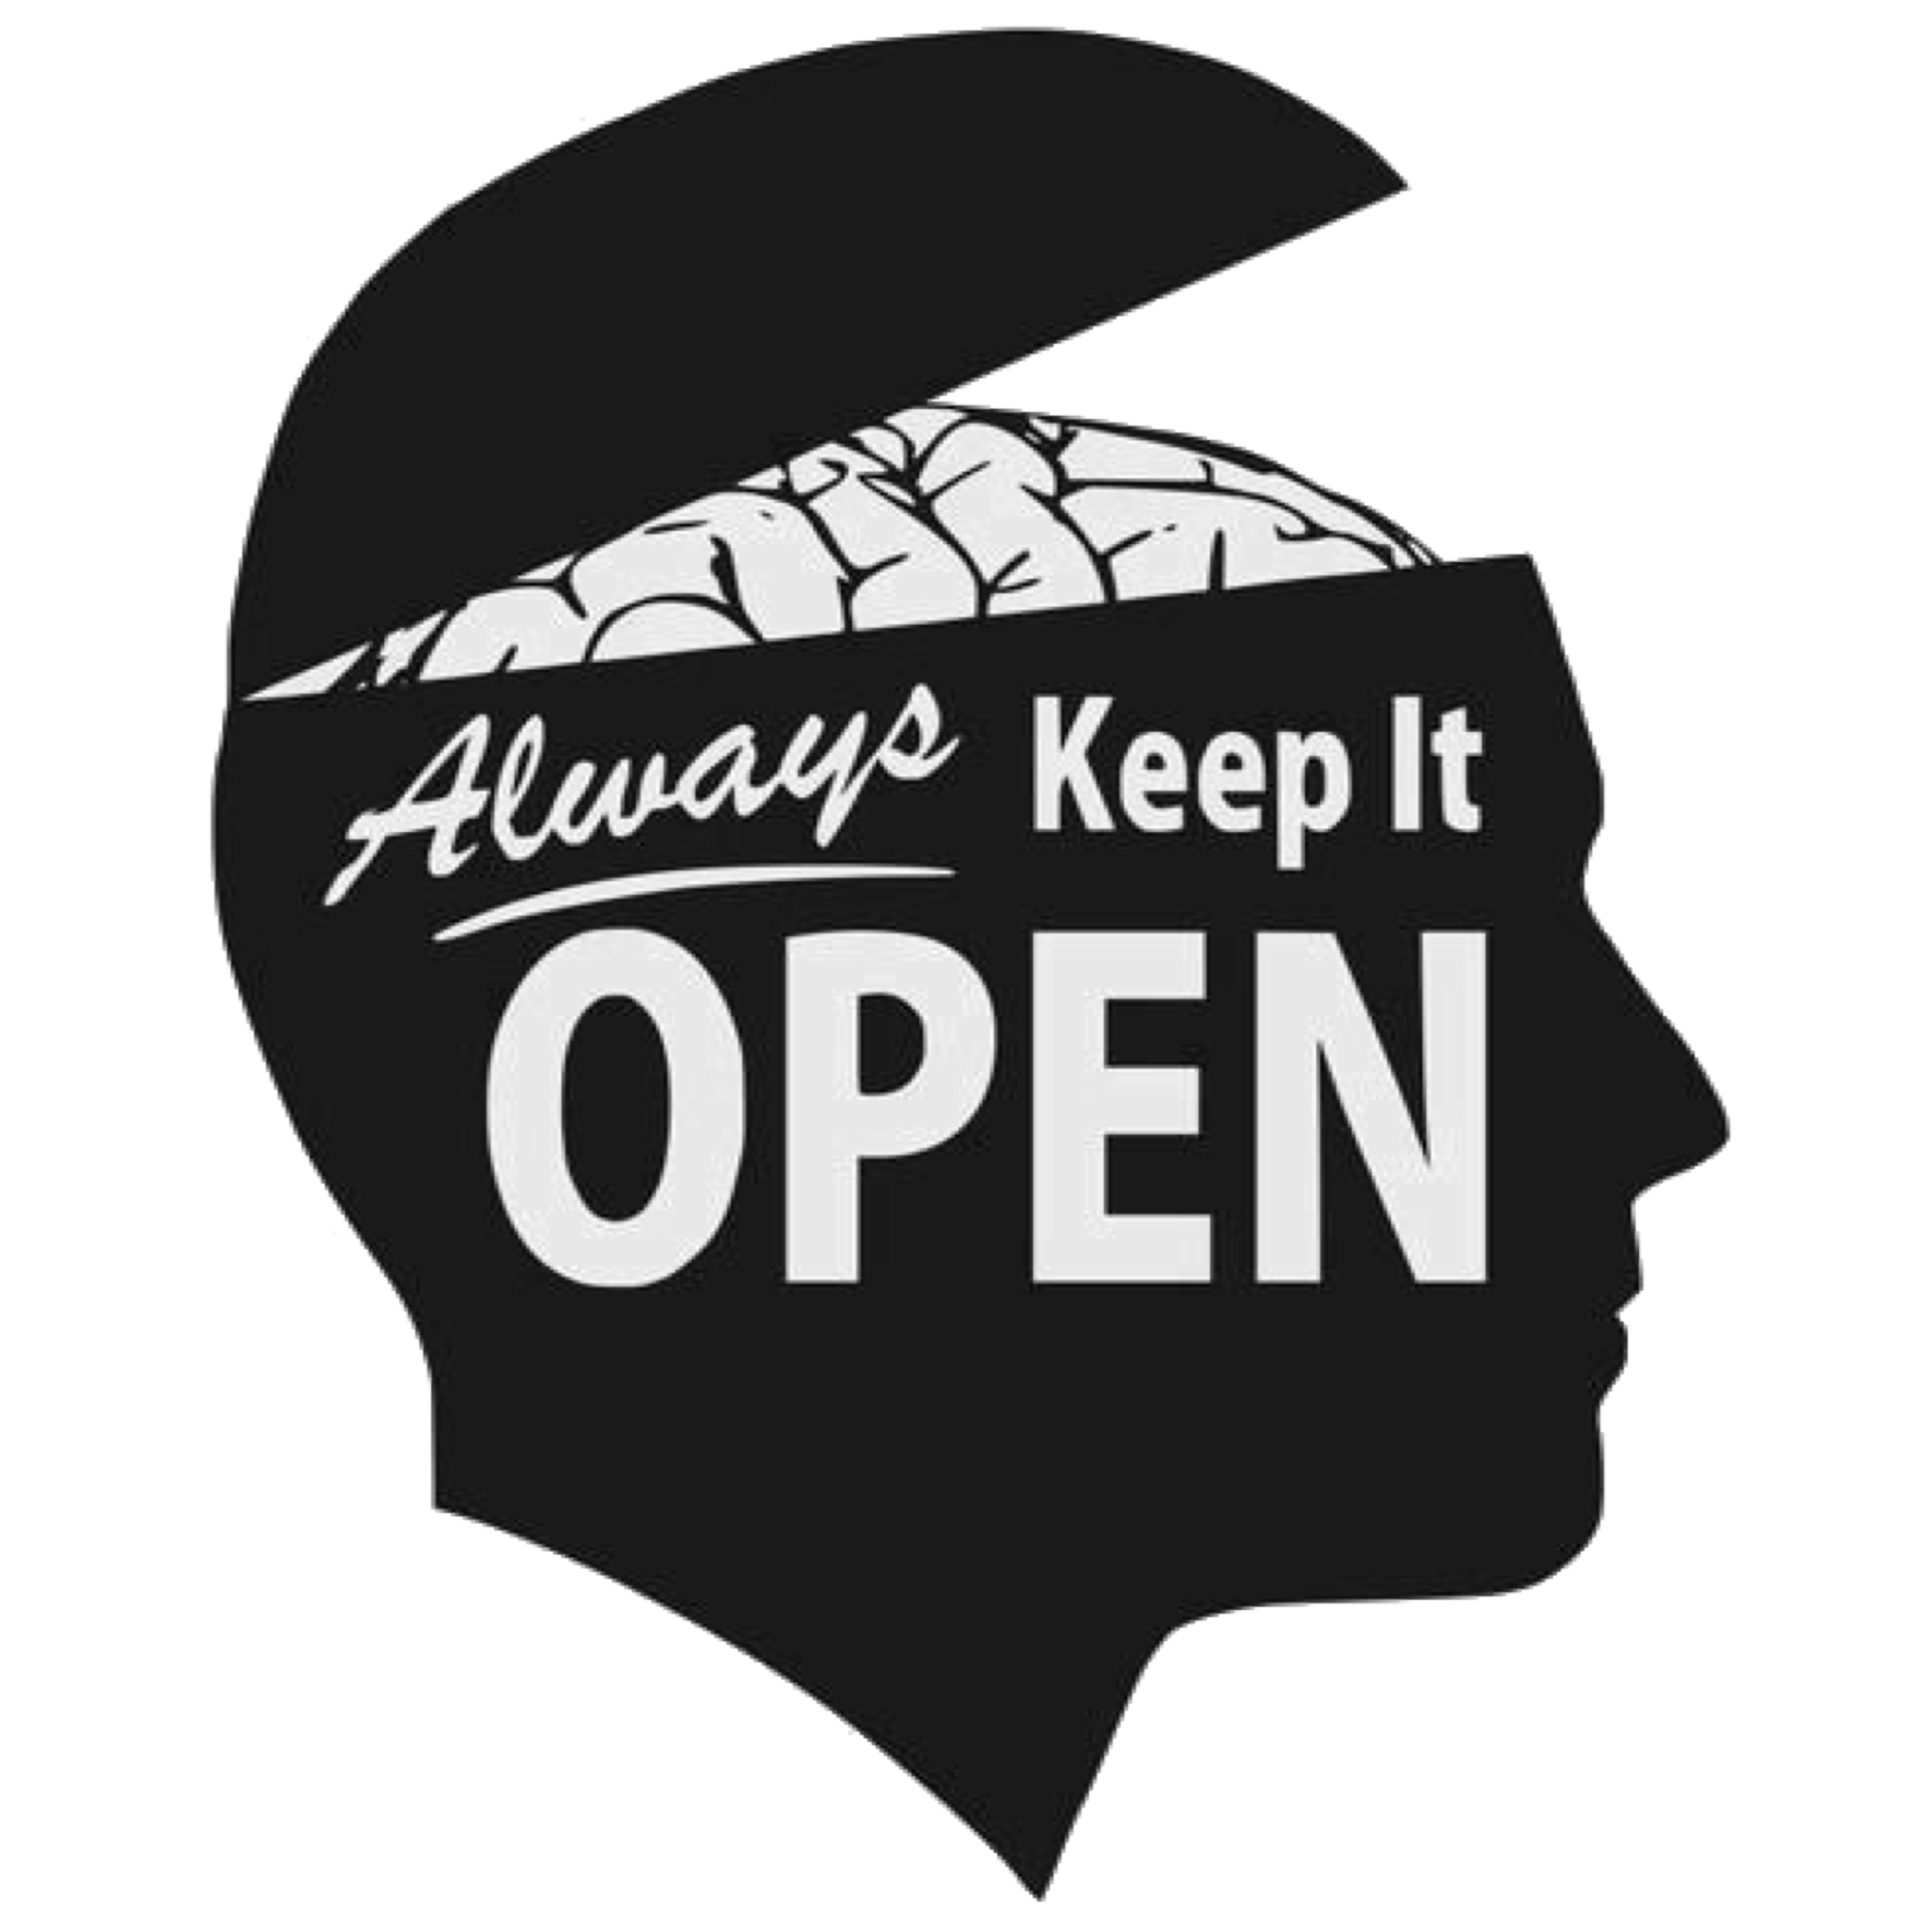 Always keep the best. Open Mind. Open minded. Keep an open Mind. Open-minded person.